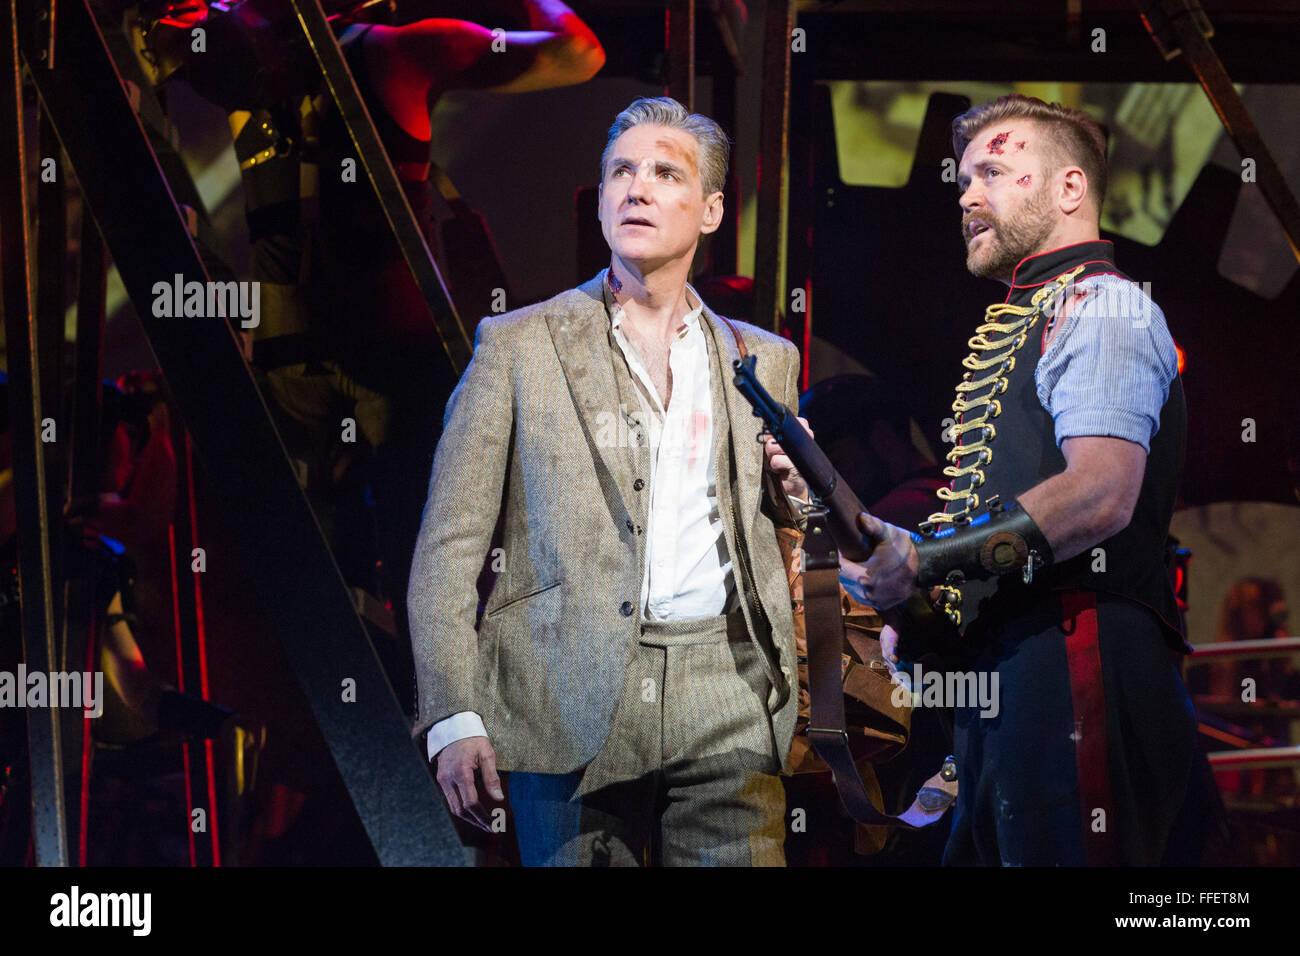 London, UK. 12 February 2016. Michael Praed and Daniel Bedingfield. Bill Kenwright and Jeff Wayne present Jeff Wayne's Musical Version of The War of the Worlds based on the classic science fiction story by HG Wells at the Dominion Theatre. Performances run from 9 February 2016. With David Essex as The Voice of Humanity, Jimmy Nail as Parson Nathaniel, Daniel Bedingfield as The Artilleryman, Michael Praed as the Journalist George Herbert, Heidi Range, Madalena Alberto as Carrie with Liam Neeson as The Journalist on screen. Credit:  Vibrant Pictures/Alamy Live News Stock Photo